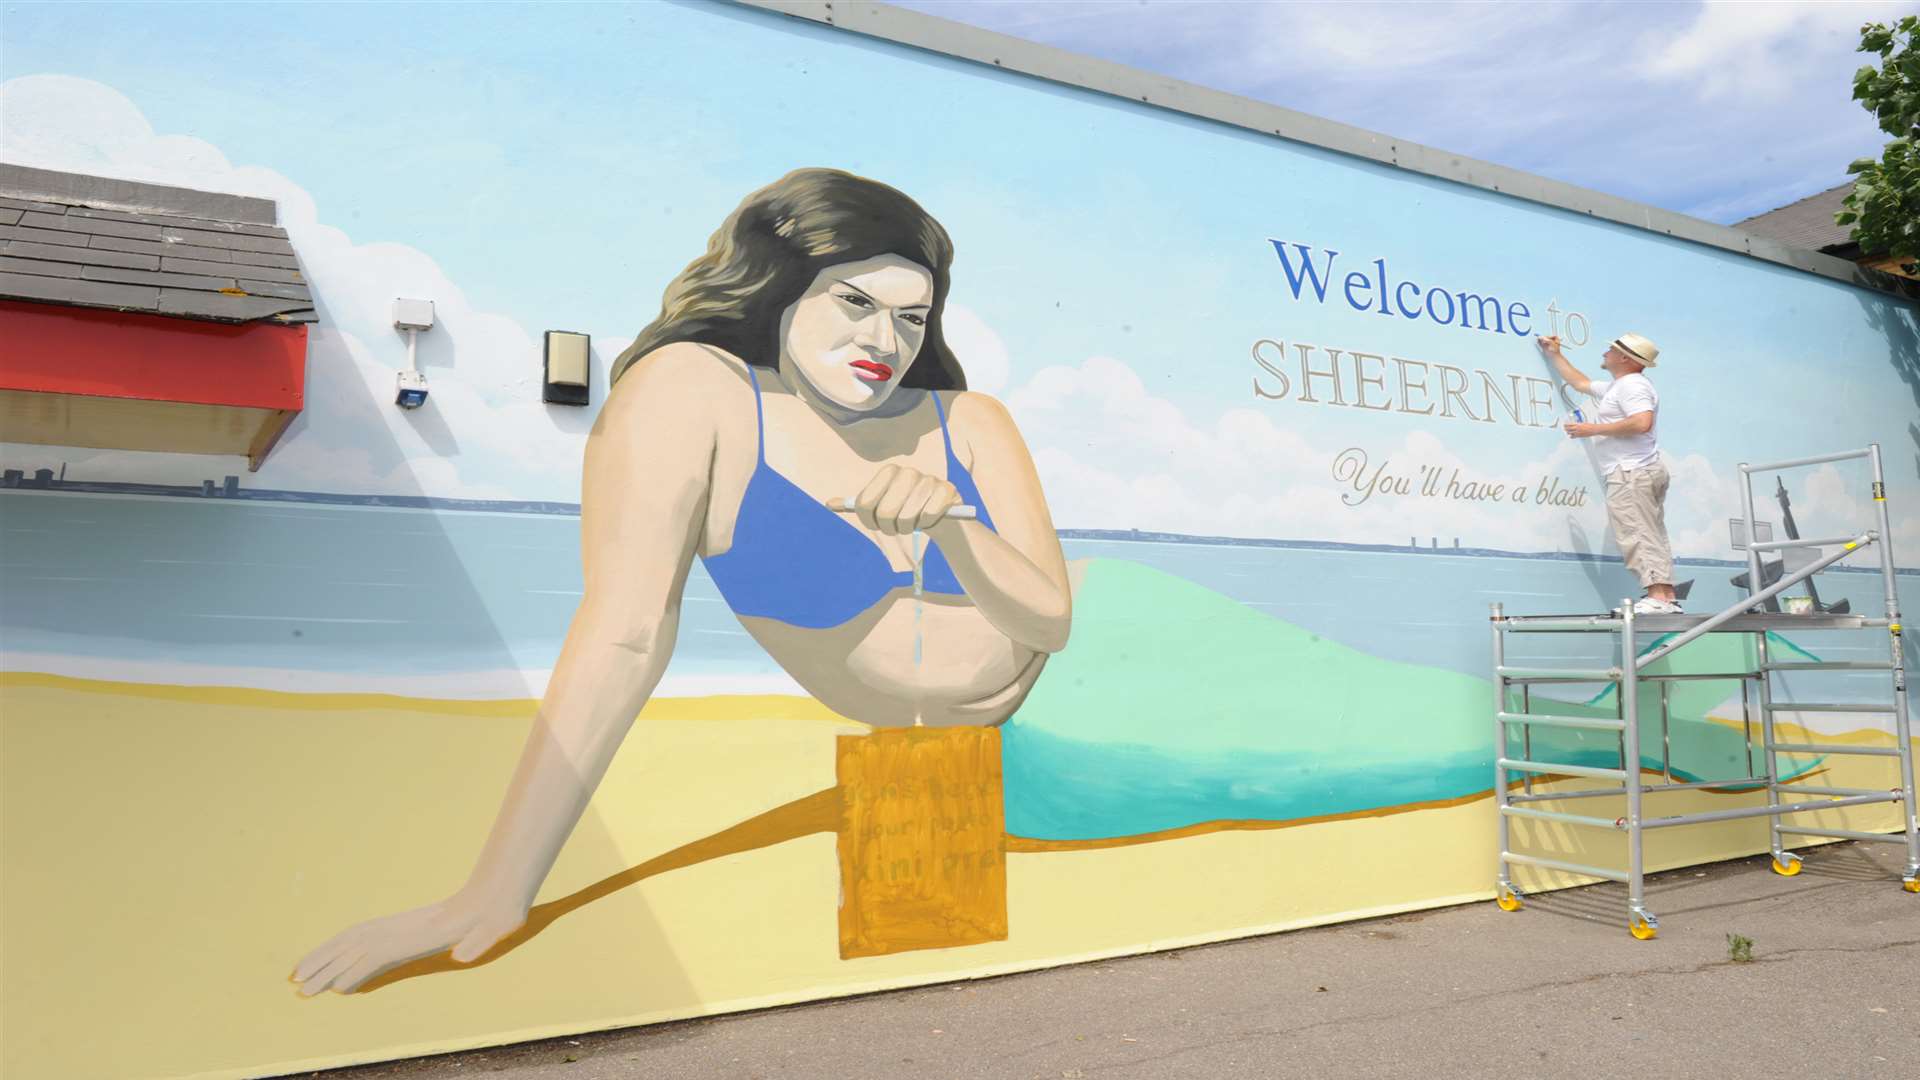 The controversial mermaid mural